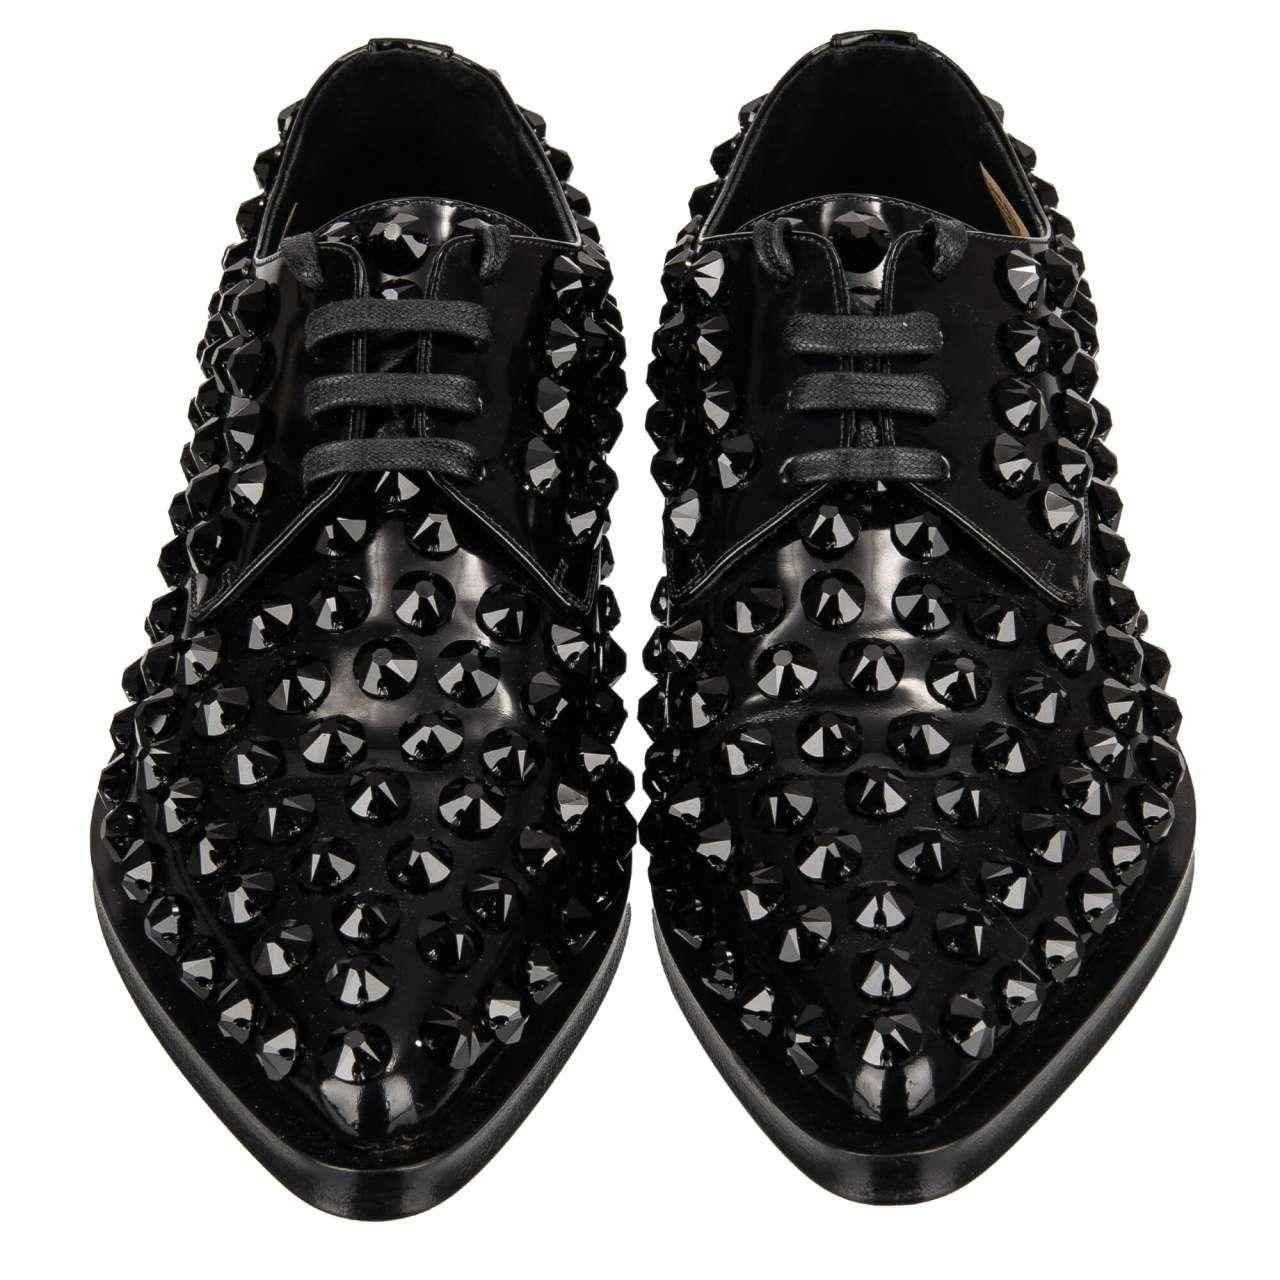 - Classic women leather shoes MILLENIALS with pointy toe shape and crystals embroidery in black by DOLCE & GABBANA - MADE IN ITALY - New with Box - Model: CN0088-AO097-8S485 - Material: 100% Calf fur - Sole: Leather - Color: BlackÂ  - Heel: 2 cm -